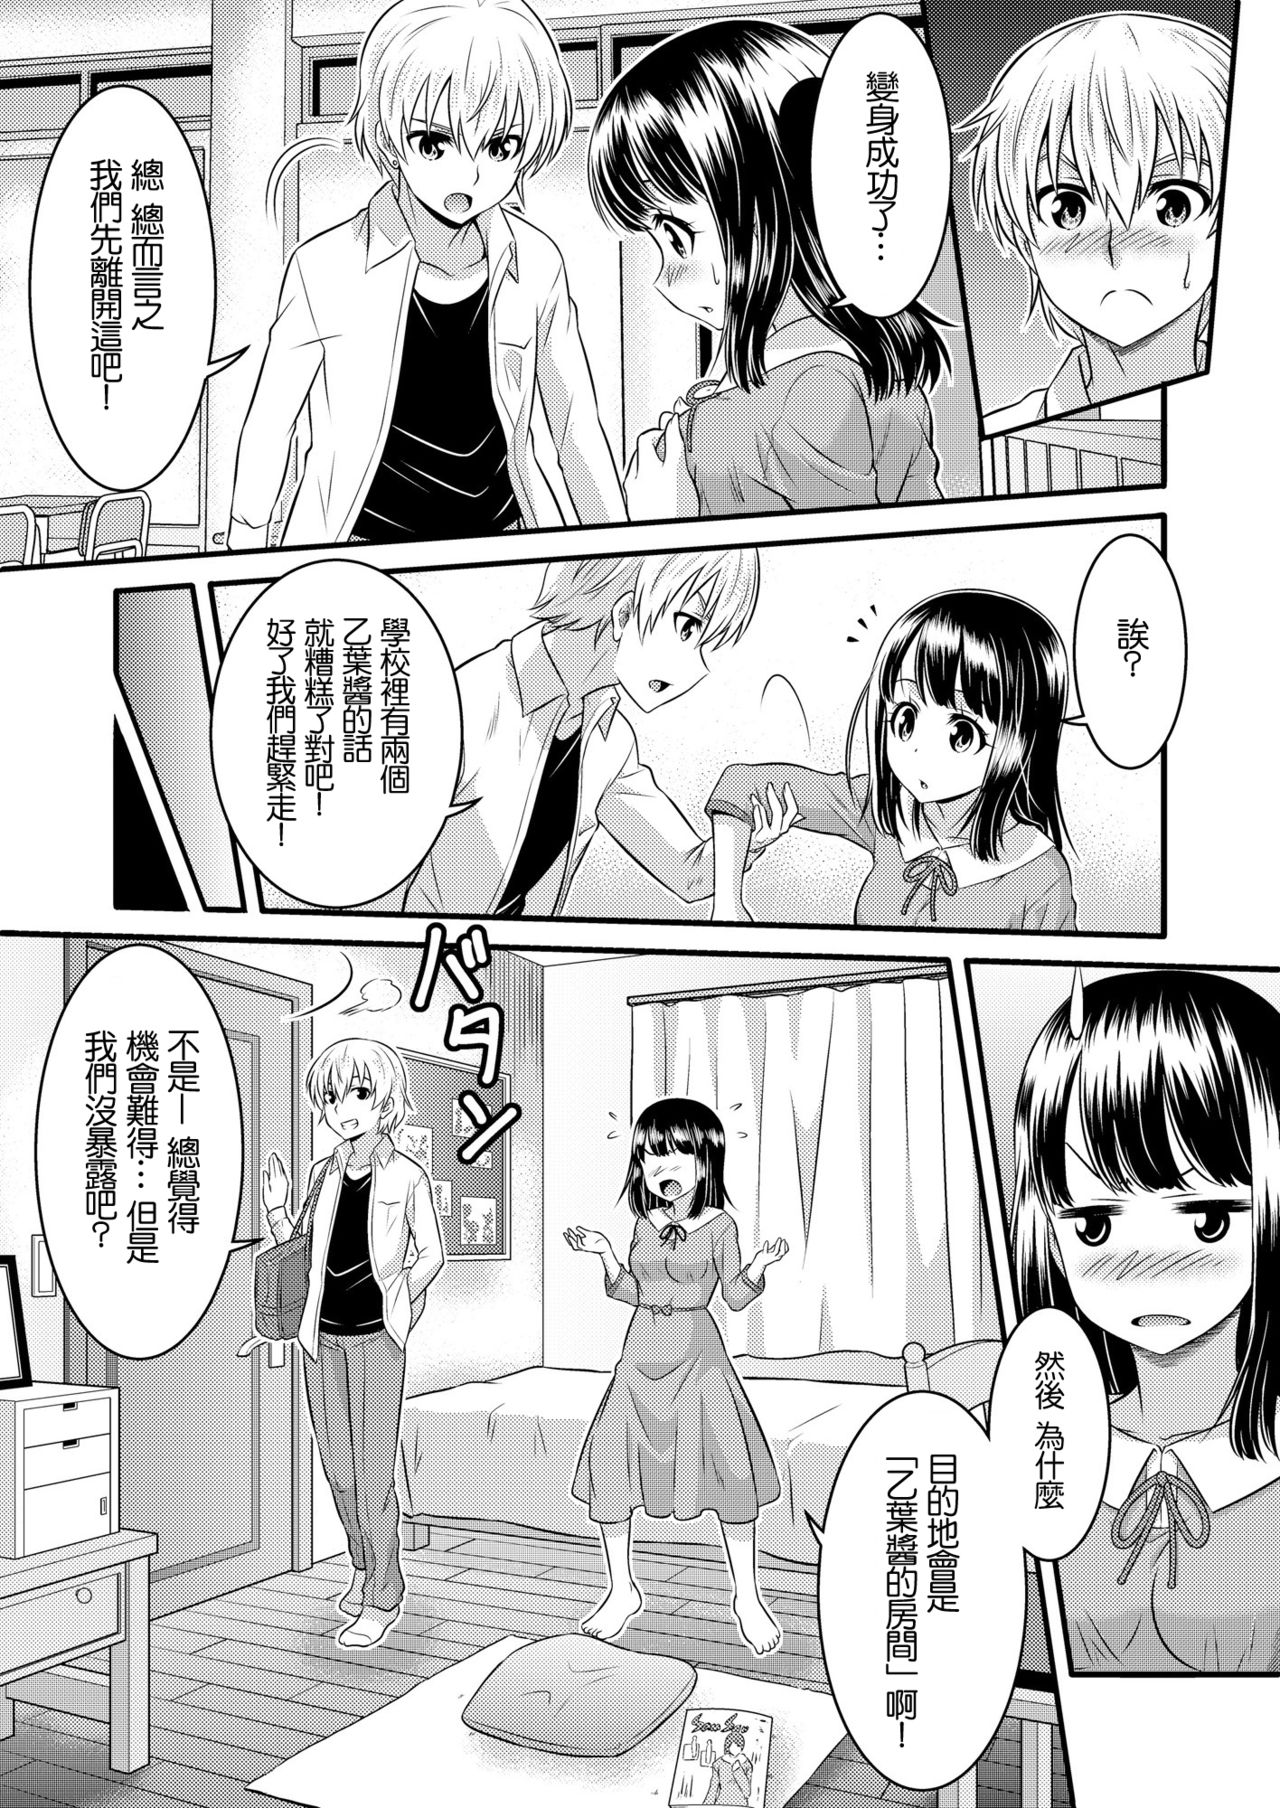 Metamorph ★ Coordination - I Become Whatever Girl I Crossdress As~ [Sister Arc, Classmate Arc] [Chinese] [瑞树汉化组] page 26 full